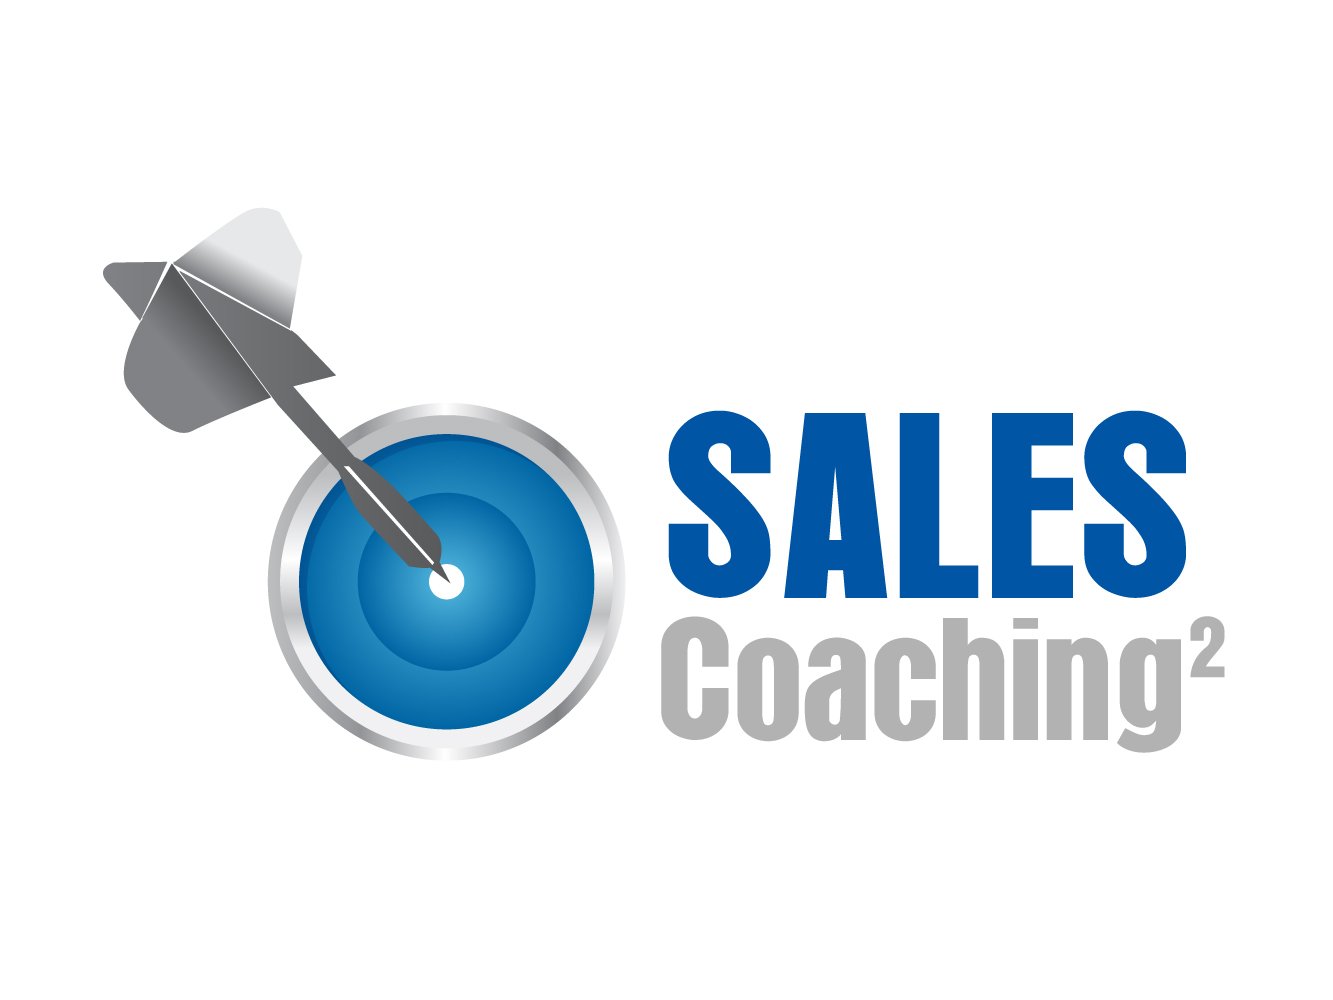 2014: The Year of Sales Coaching: How Will You Start?